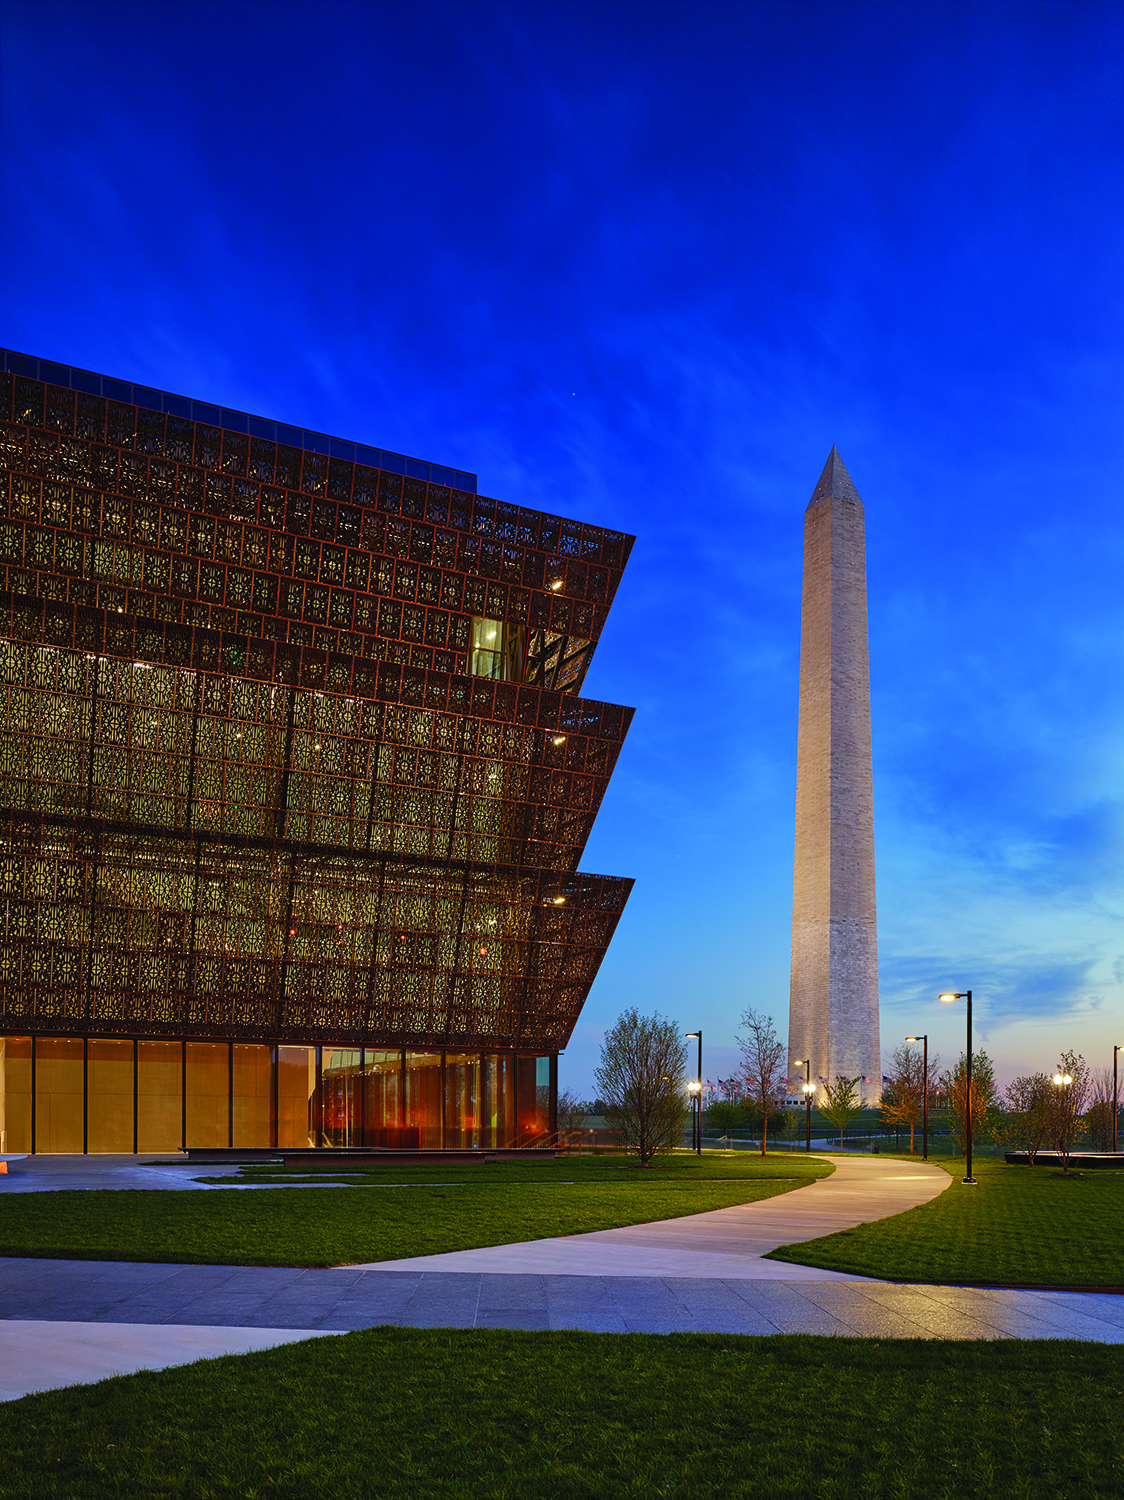 Smithsonian National Museum of African American History & Culture by Freelon Adjaye Bond/SmithGroupJJR (The Freelon Group, Adjaye Associates, Davis Brody Bond, and SmithGroupJJR). Credit: Alan Karchmer; rights held by The Smithsonian Institution.